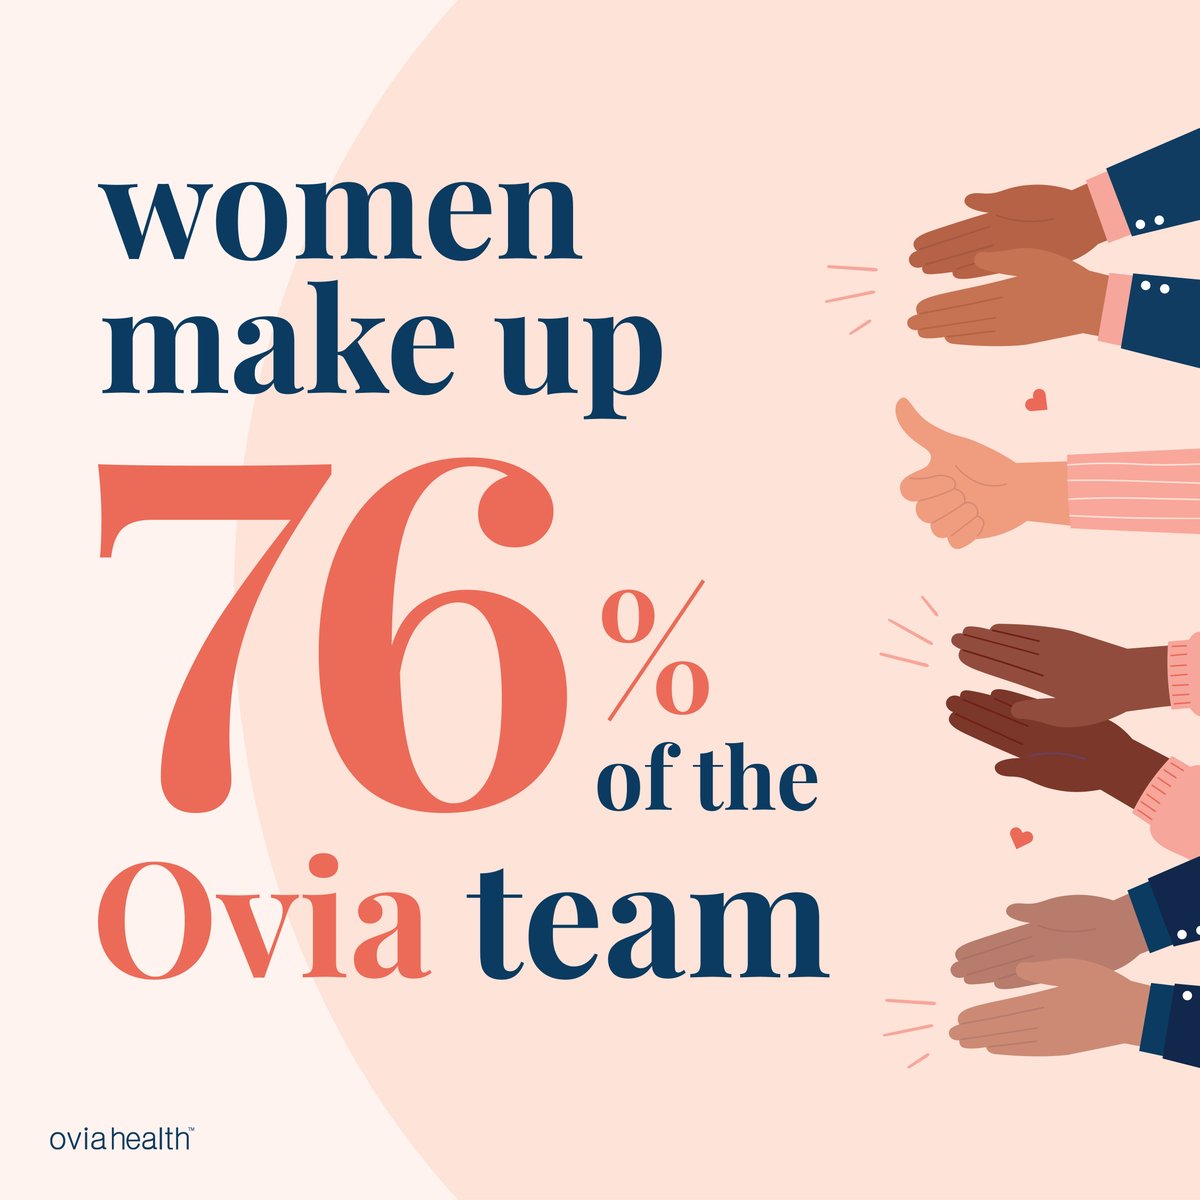 Did you know that women make up 76% of the Ovia team? For Women's History Month this year, we're celebrating our incredible team, who work daily to help the Ovia community live happier and healthier lives. To learn more, schedule time to speak with us: ow.ly/70Mz50Njxra